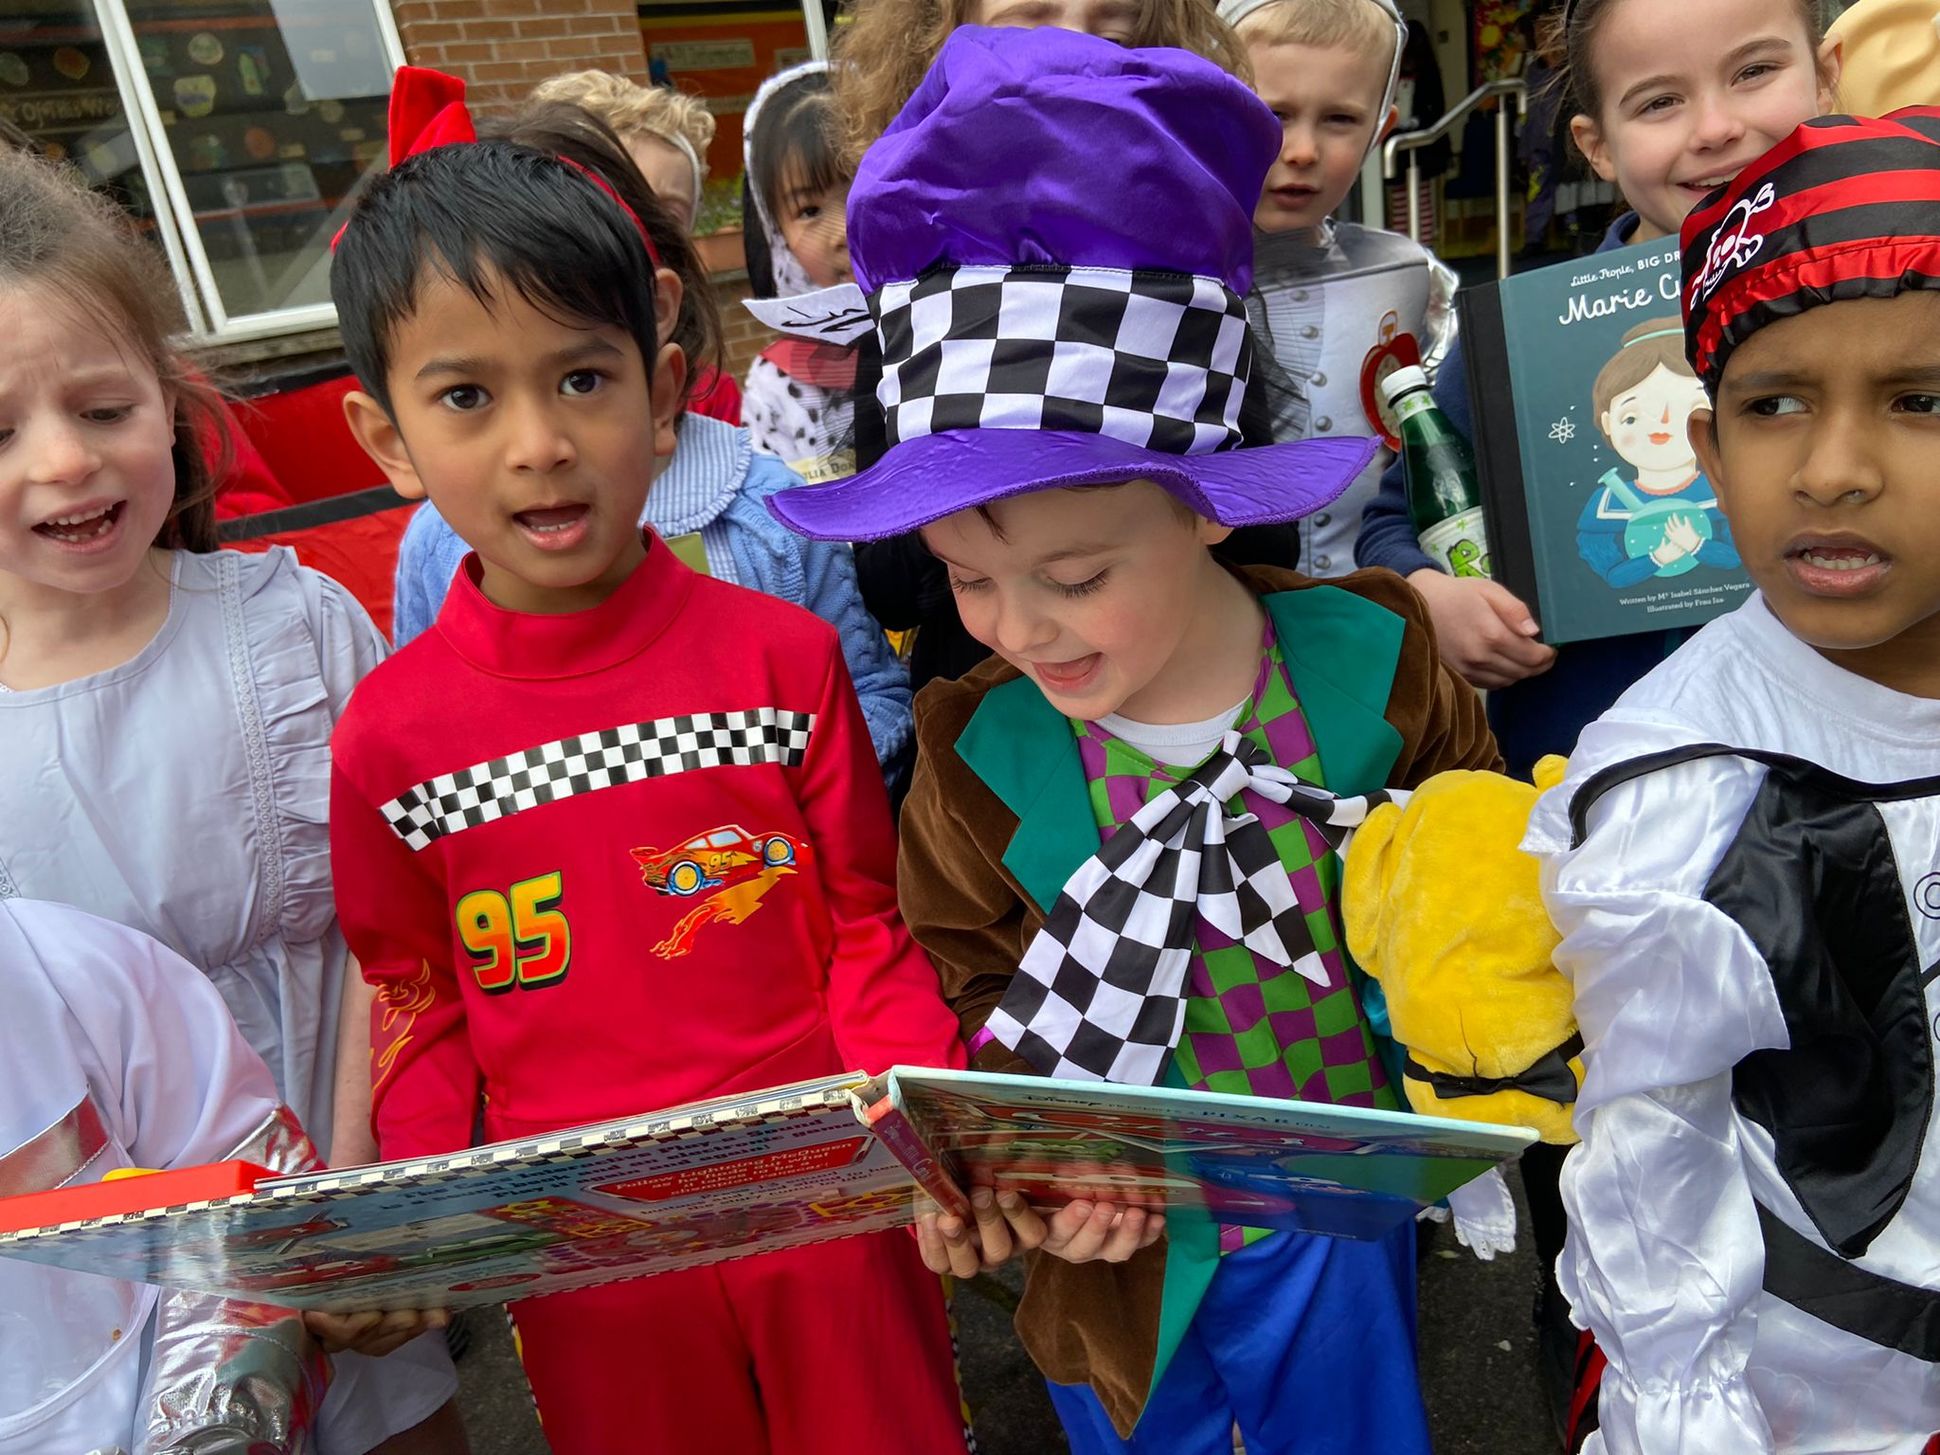 READING TIME: Pupils at St Bride's were allowed to come to school dressed as their favourite characters 